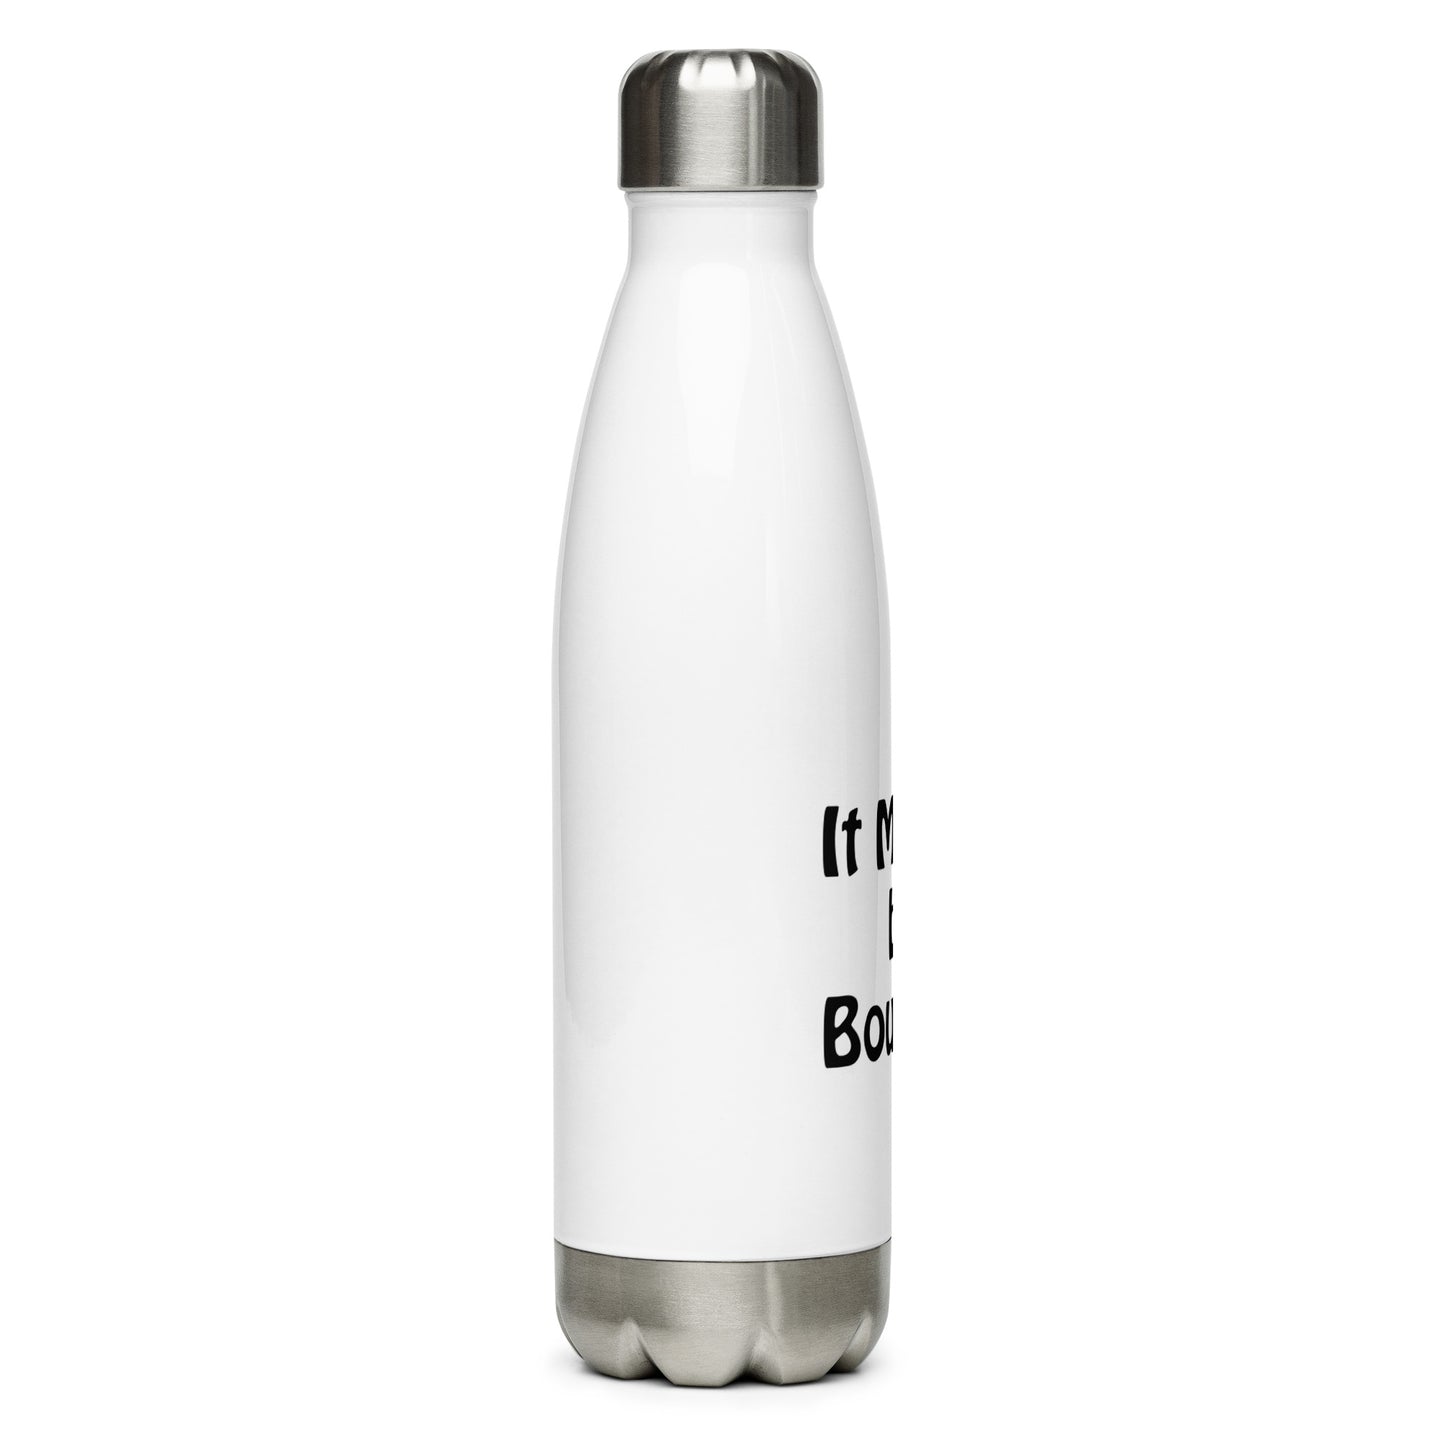 "It Might Be Bourbon" Stainless Steel Water Bottle